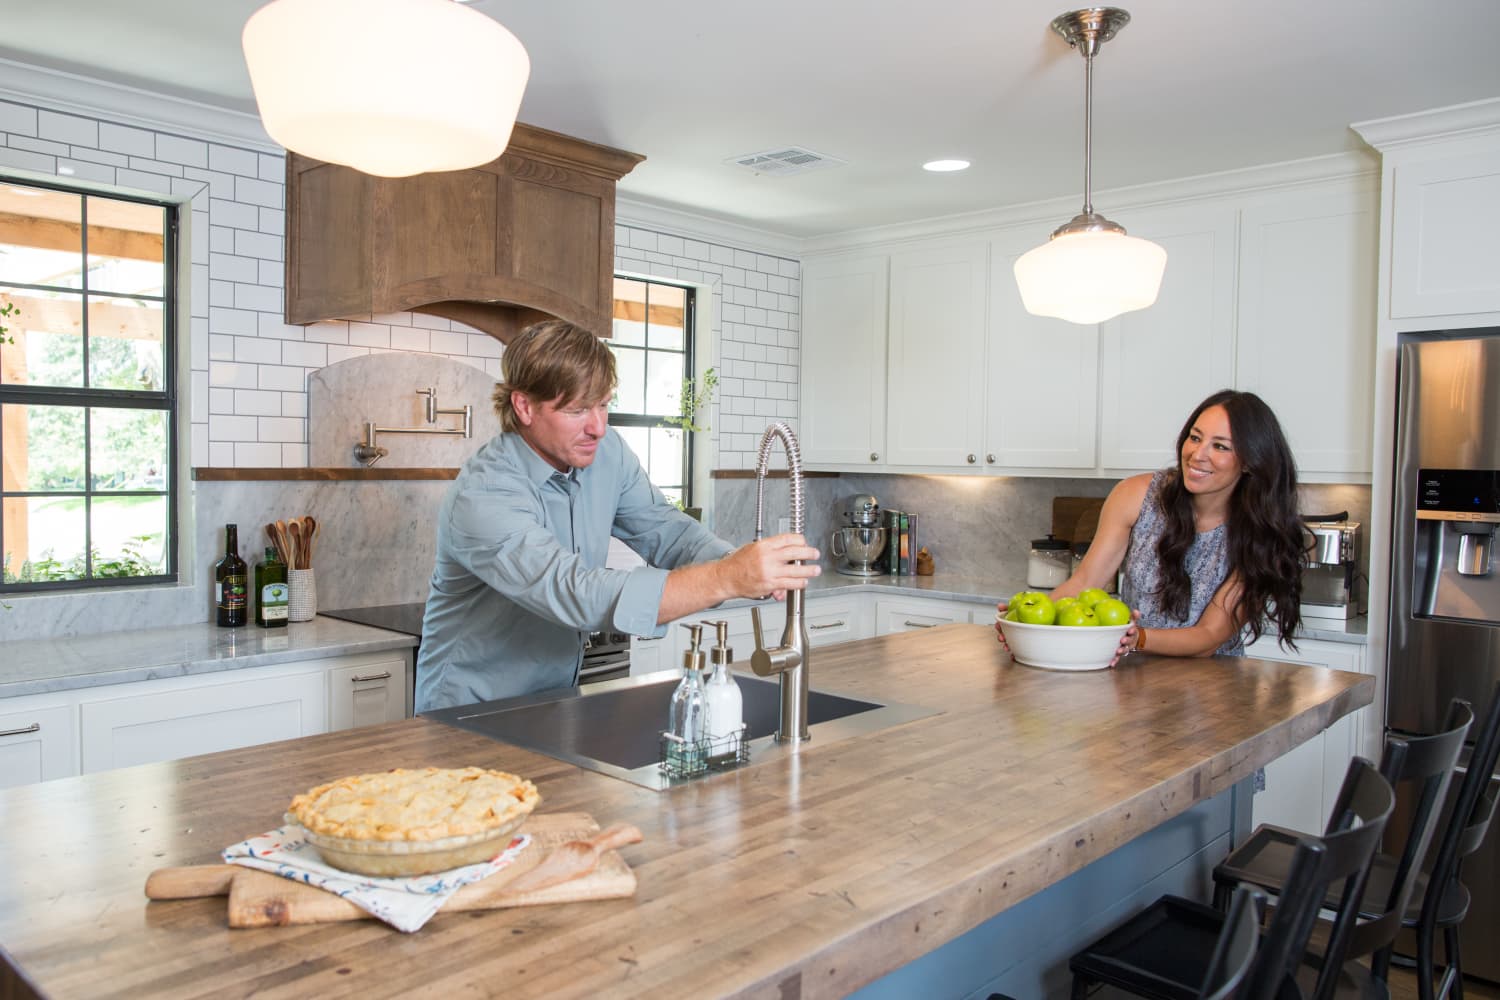 Joanna Gaines Dropped a New Kitchen Collection Just in Time for Holiday Baking